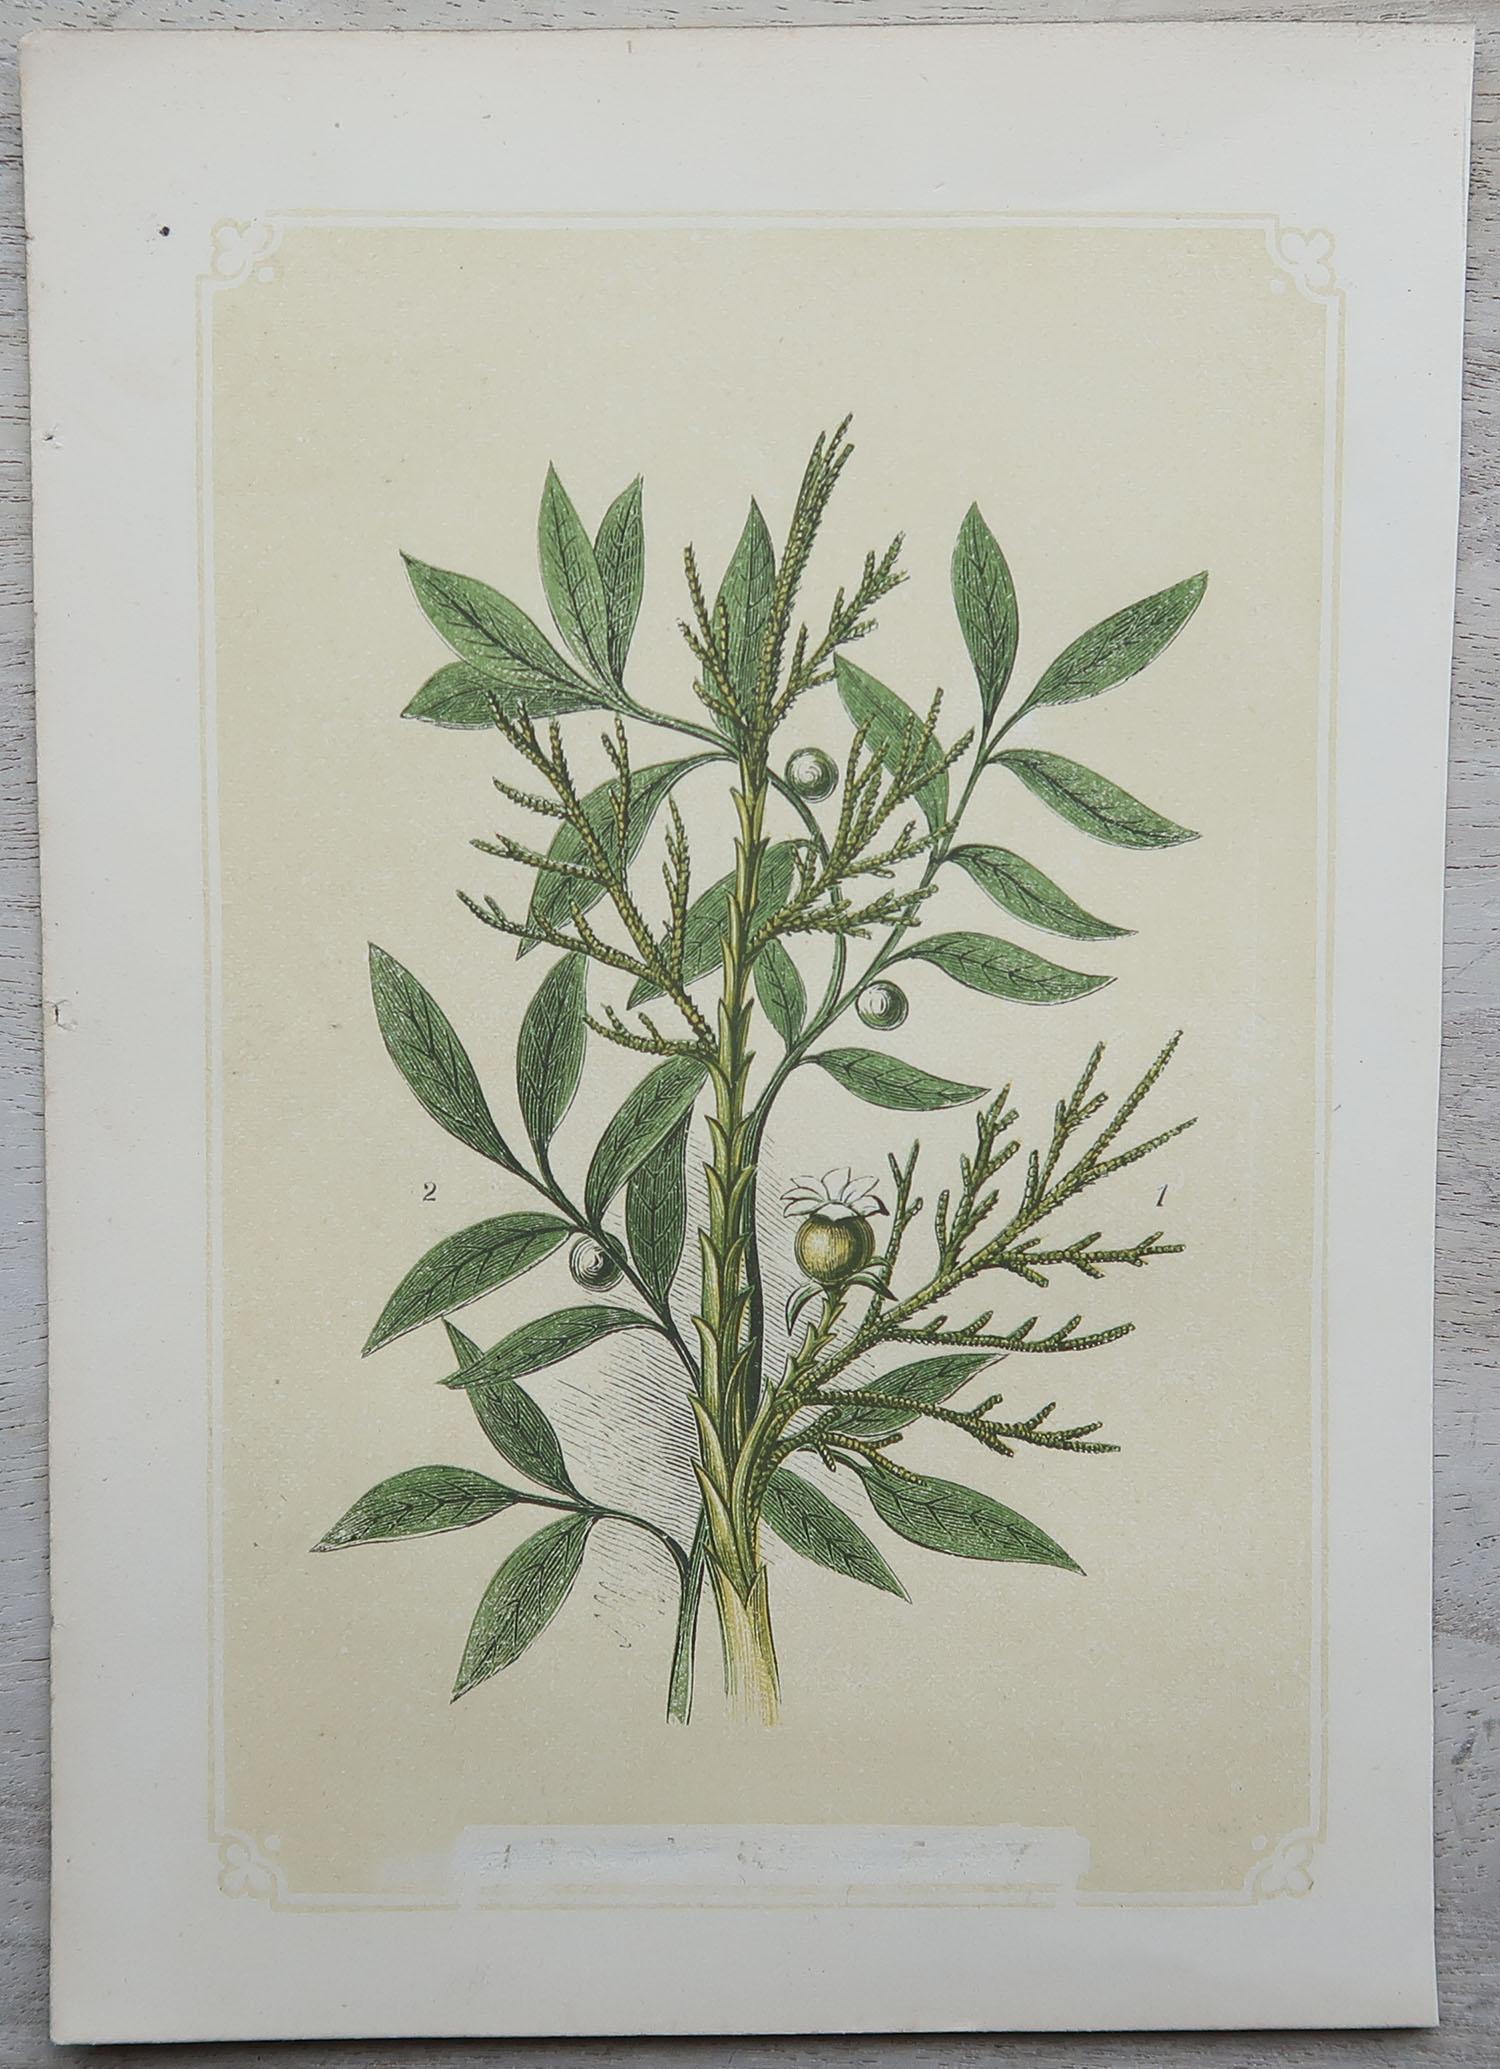 Wonderful set of 12 botanical prints, all different herbs and spices.

Including thyme, saffron, cumin, coriander, mustard, bay, cinnamon, mint, lentils, acacia, aloe, pistachio and juniper etc

Lithographs with original colour

Published by